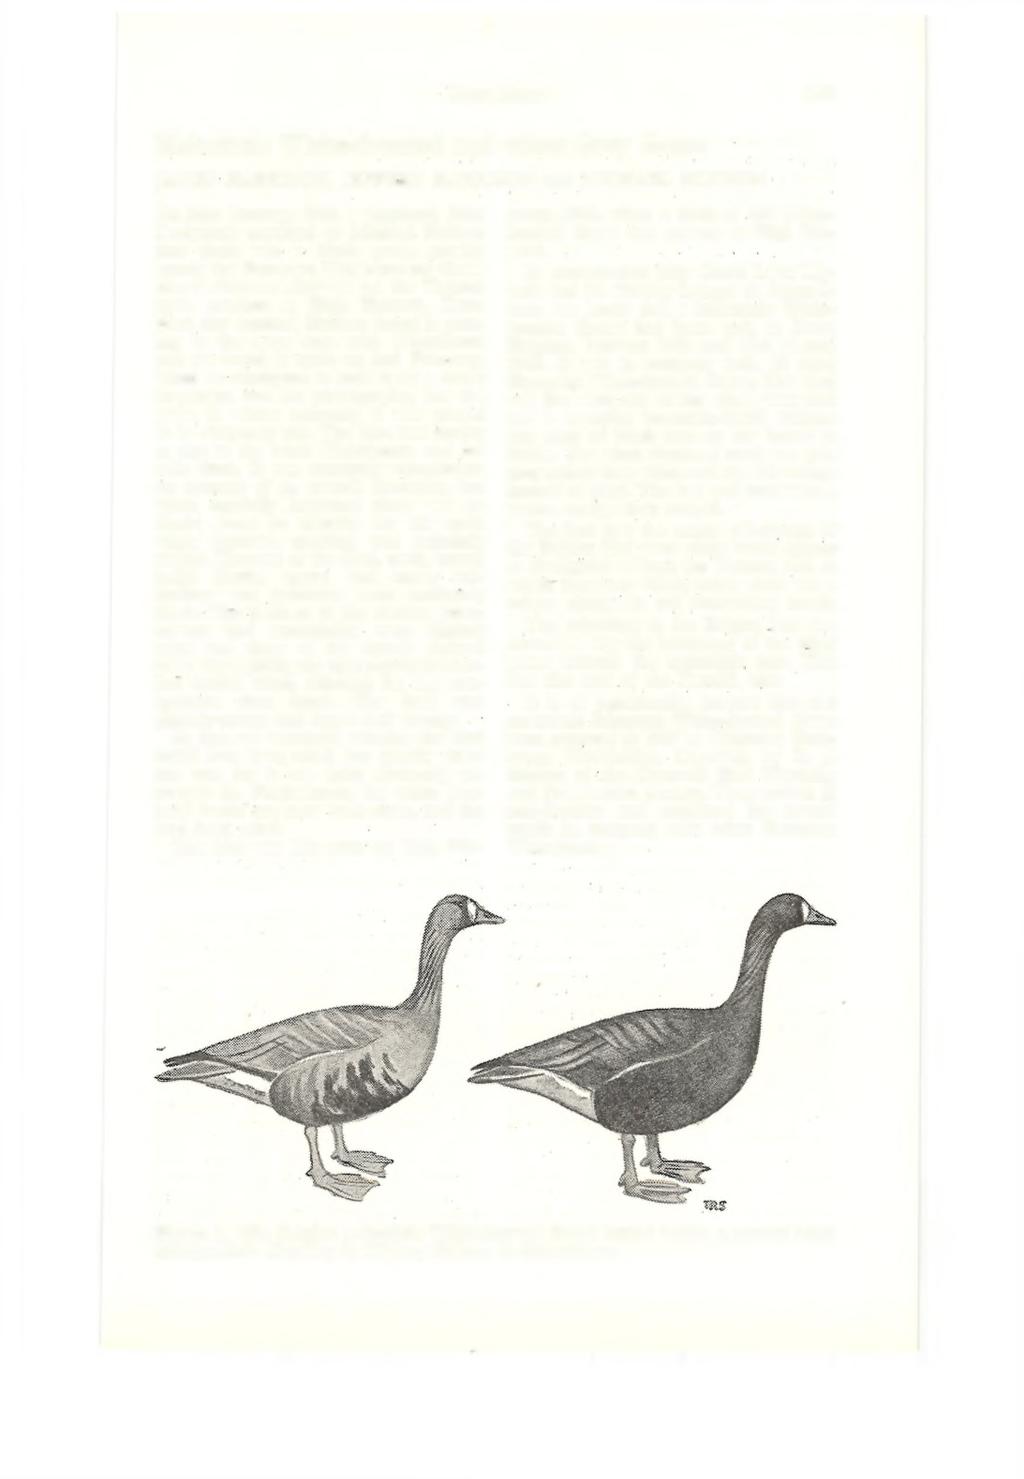 Short Notes 153 Melanislie White-fronted and other Grey Geese JAMES HARRISON, JEFFERY HARRISON and MICHAEL HUDSON On 28th January, 1966, a shepherd, John Dockwrey, reported to Michael Hudson that